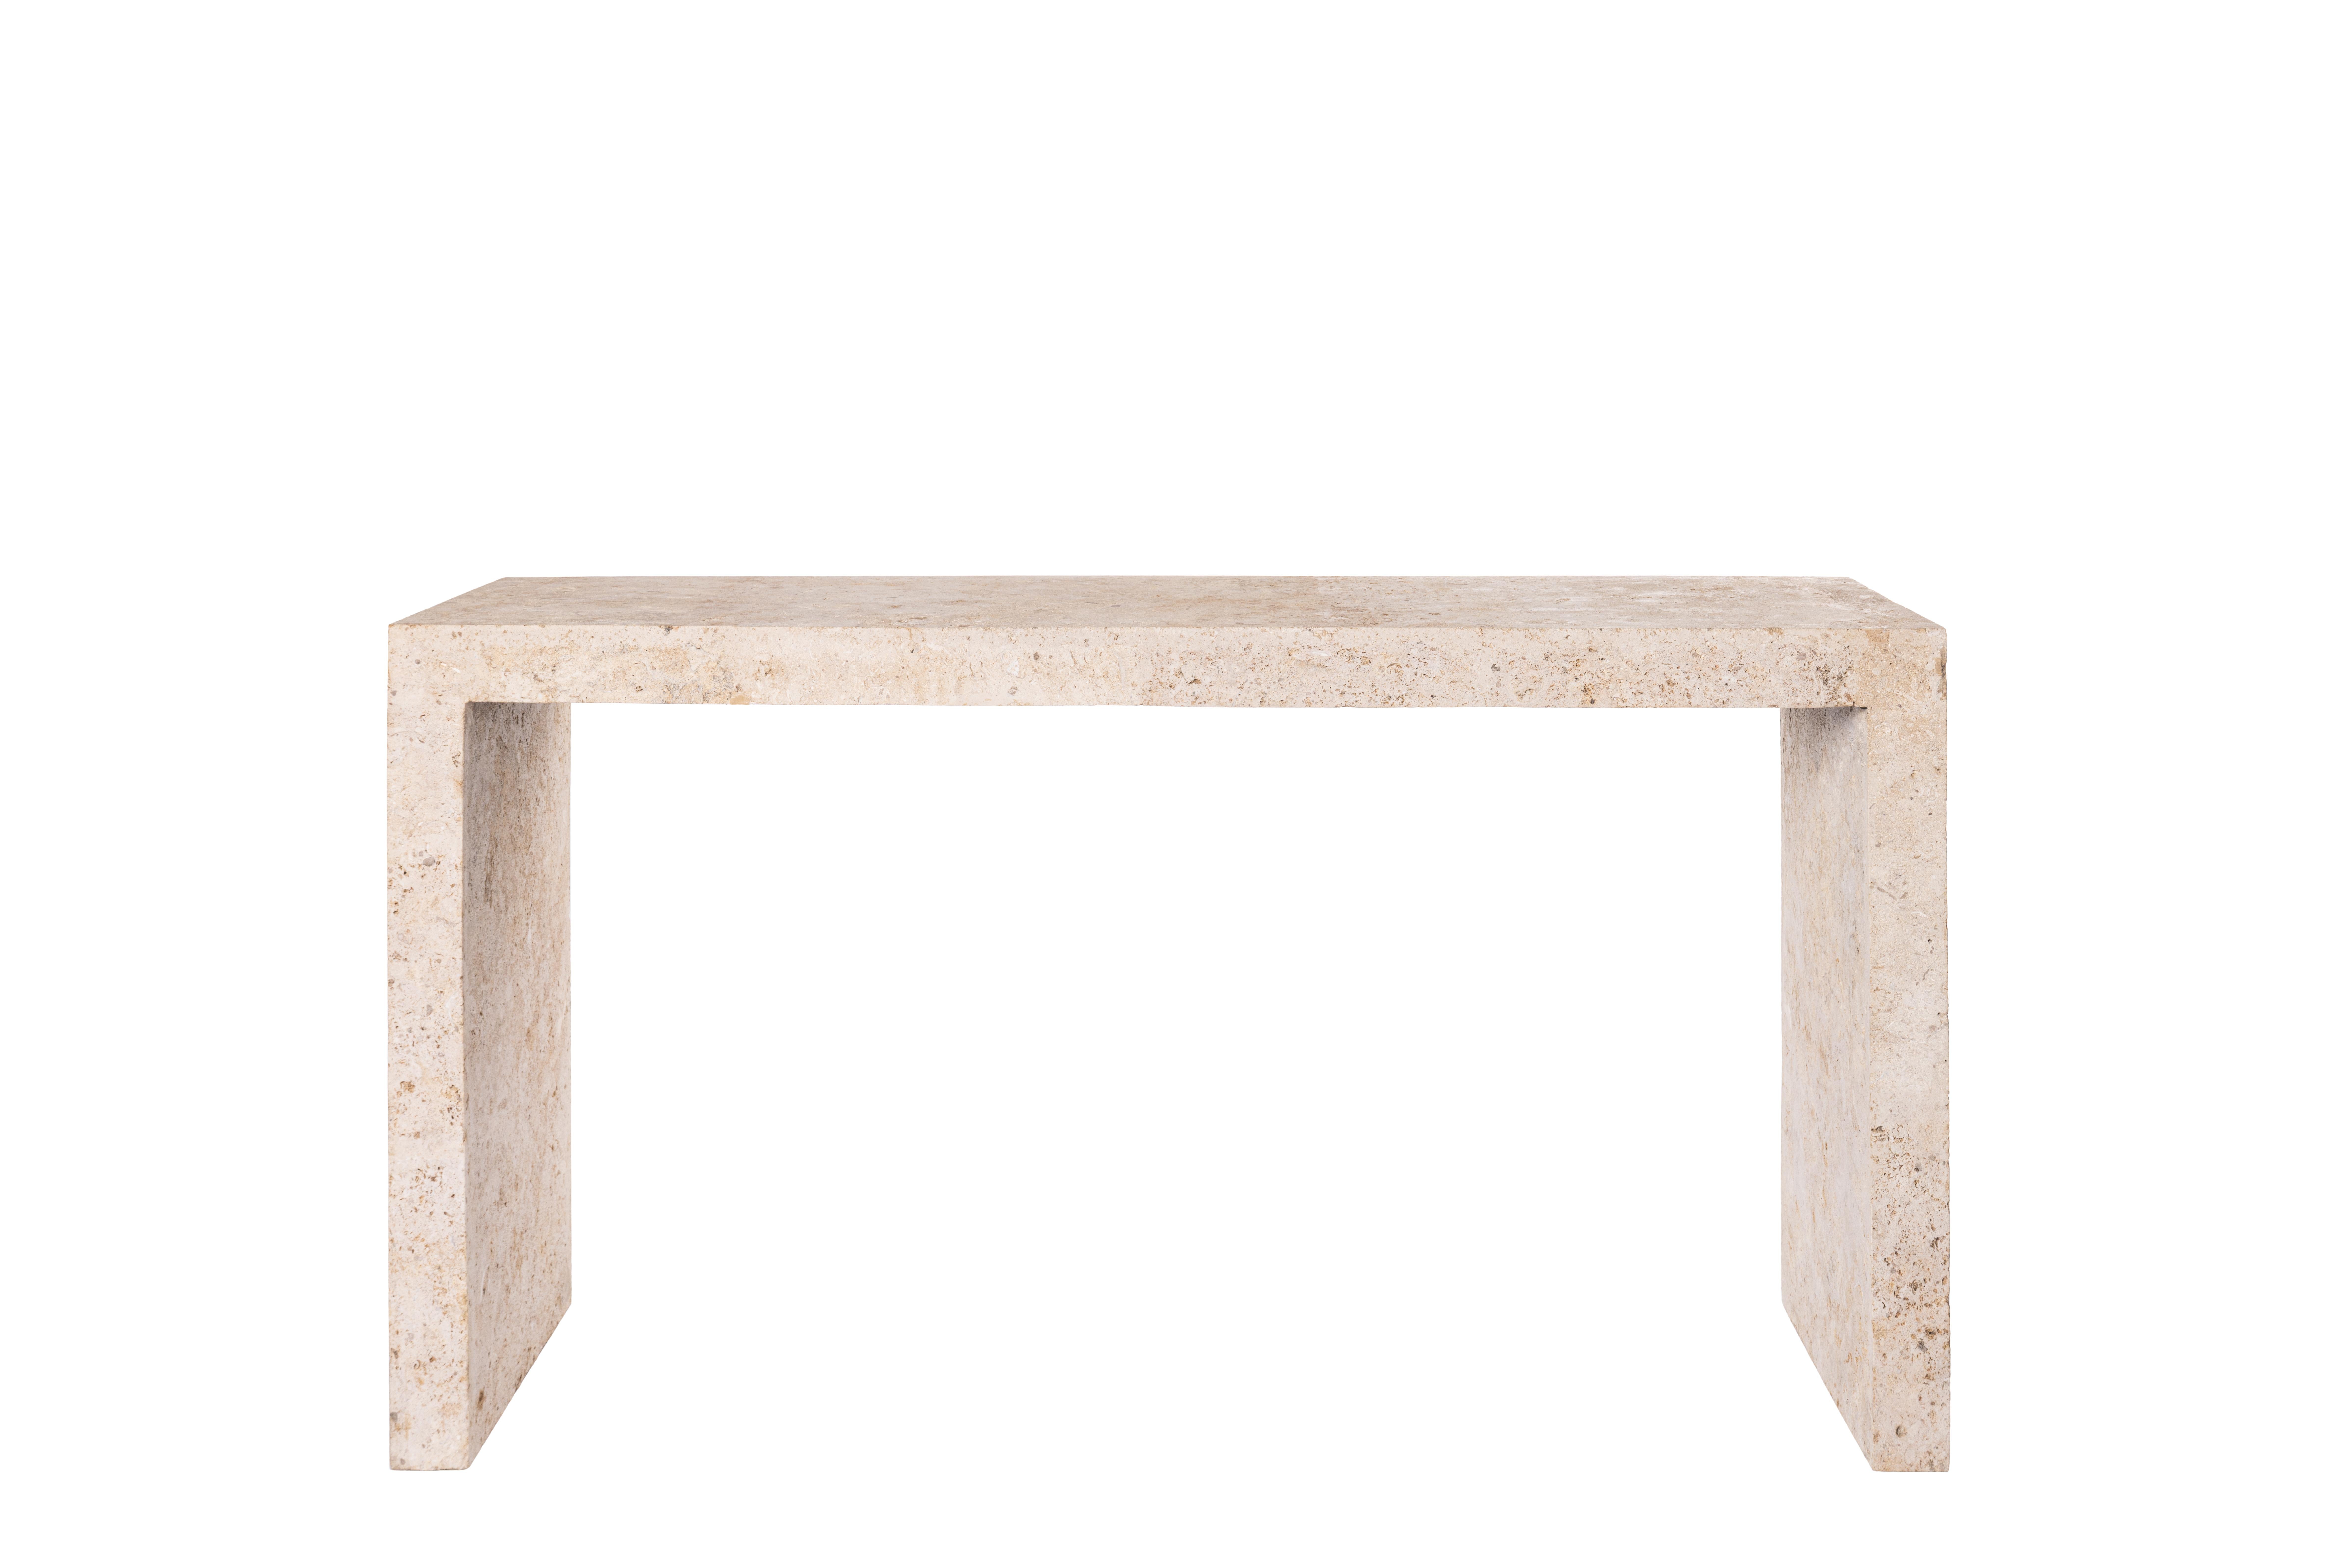 Crafted with a focus on elegant design, clean lines, and captivating materials, the Quincy Cocktail Table caters to those with discerning taste. Made from locally sourced Mactan stone, carefully harvested in the Philippines, this table seamlessly